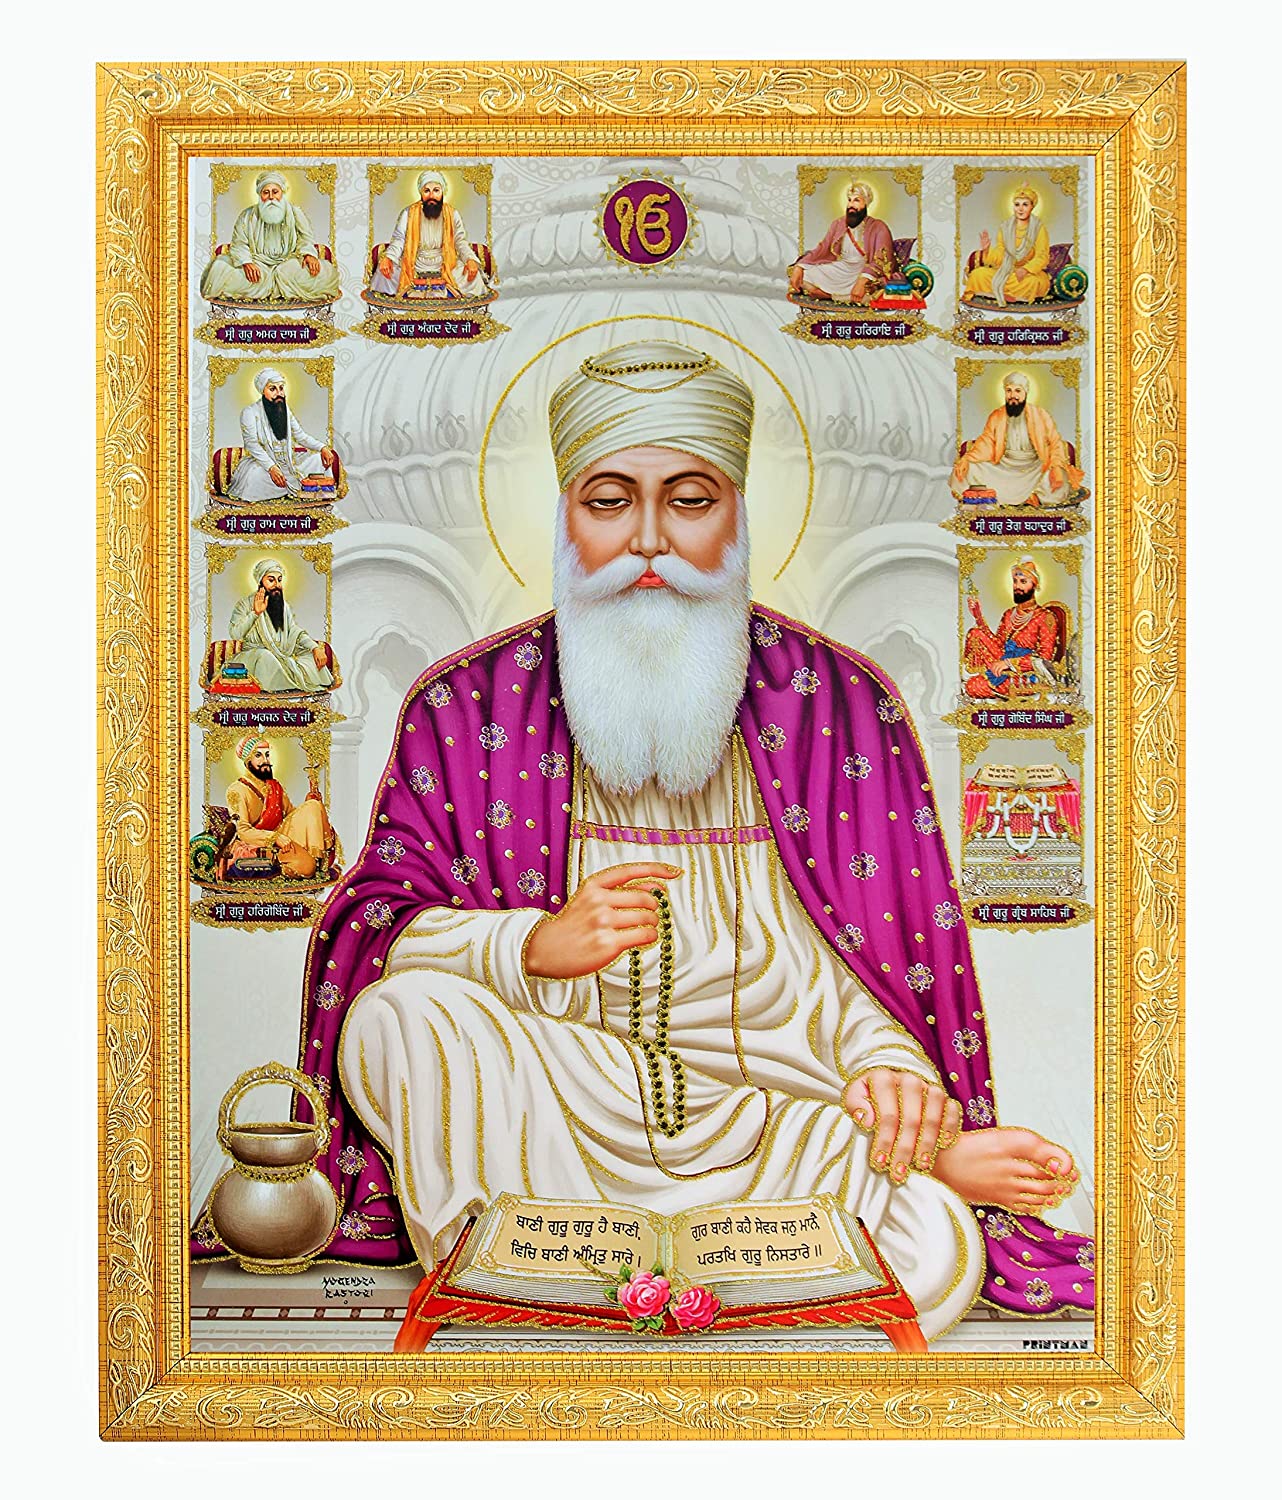 Buy Bm Traders Sikh 10 Gurus Golden Zari Art Work Photo in Golden Frame Big (14 X 18 Inches) Religious Wall Decor Online at Low Prices in India